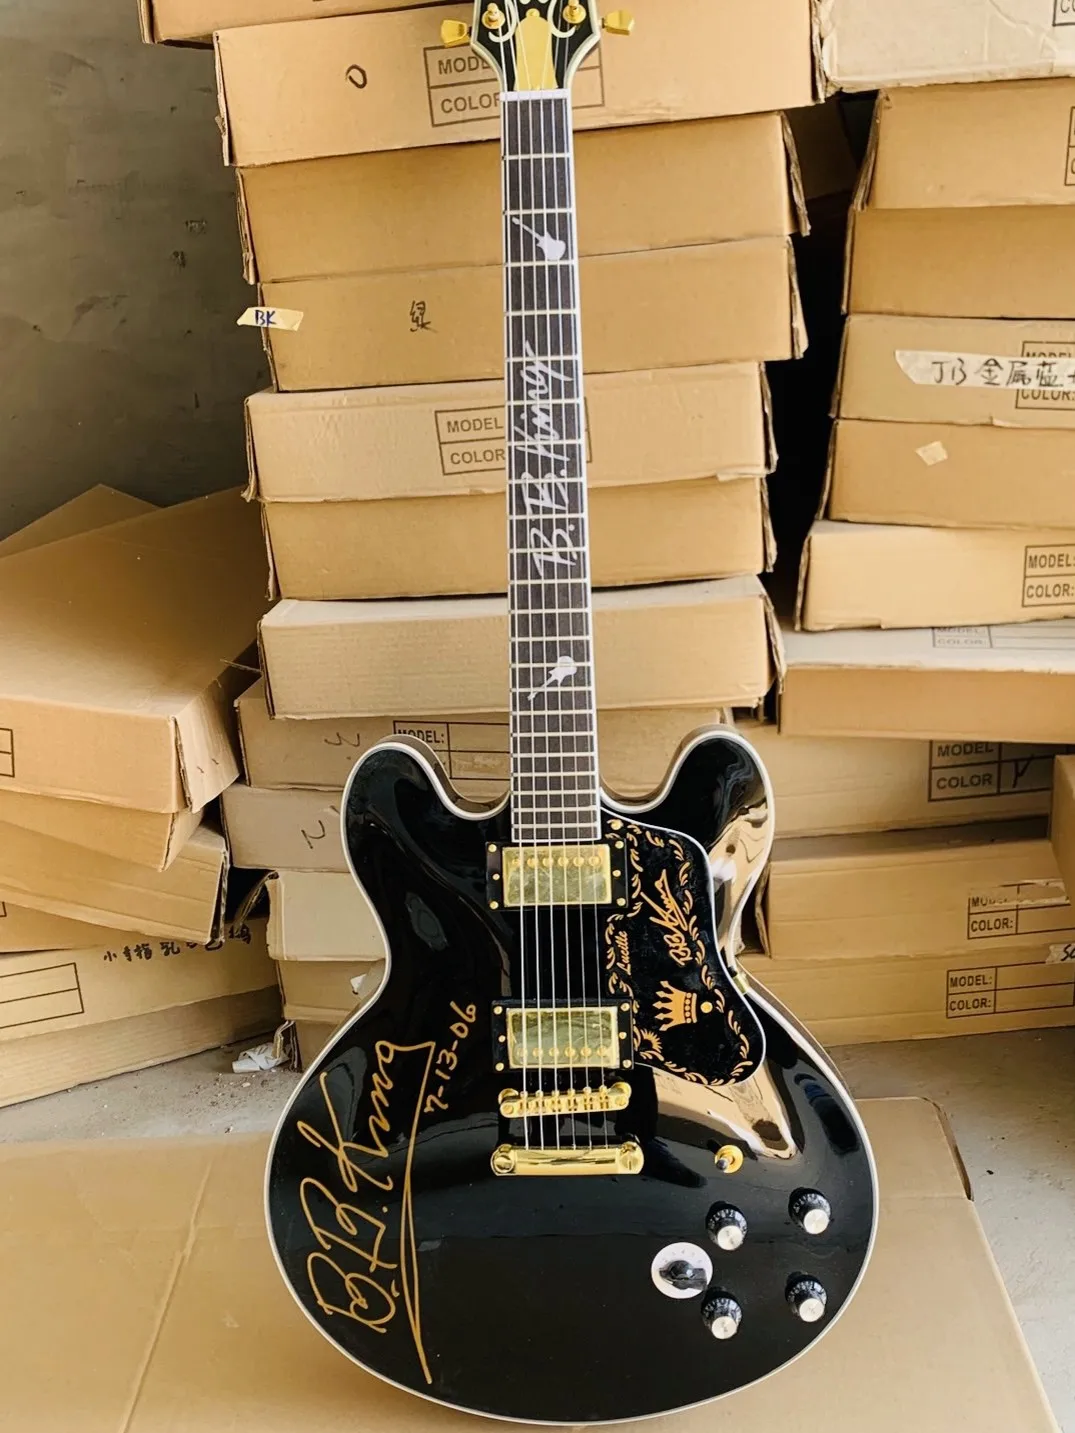 

Chinese Electric Guitar Black Color BB kING 6 String Jazz Guitar Semi-Hollow Gold Hardware Rosewood Fingerboard Glossy Finish